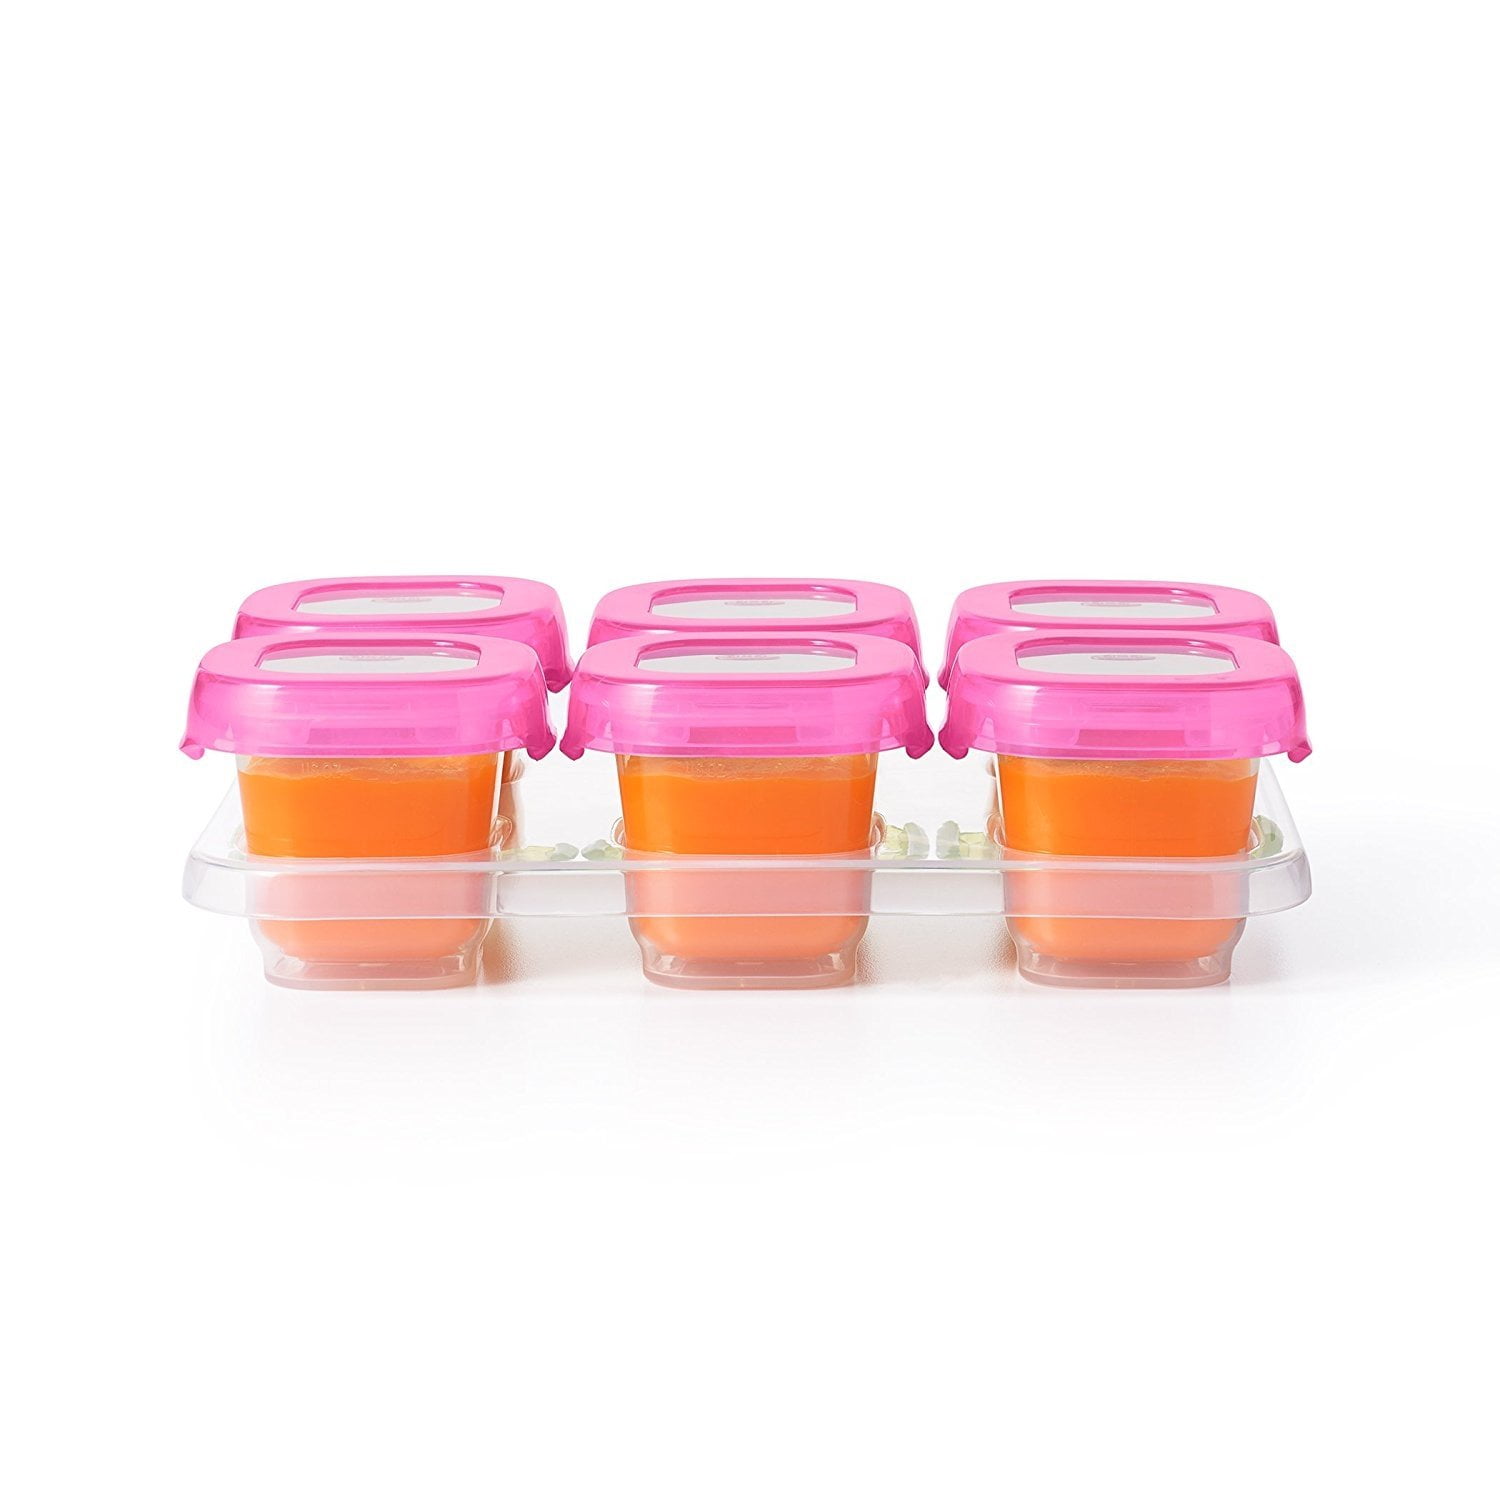 OXO Tot Baby Blocks (6 oz) Storage Containers